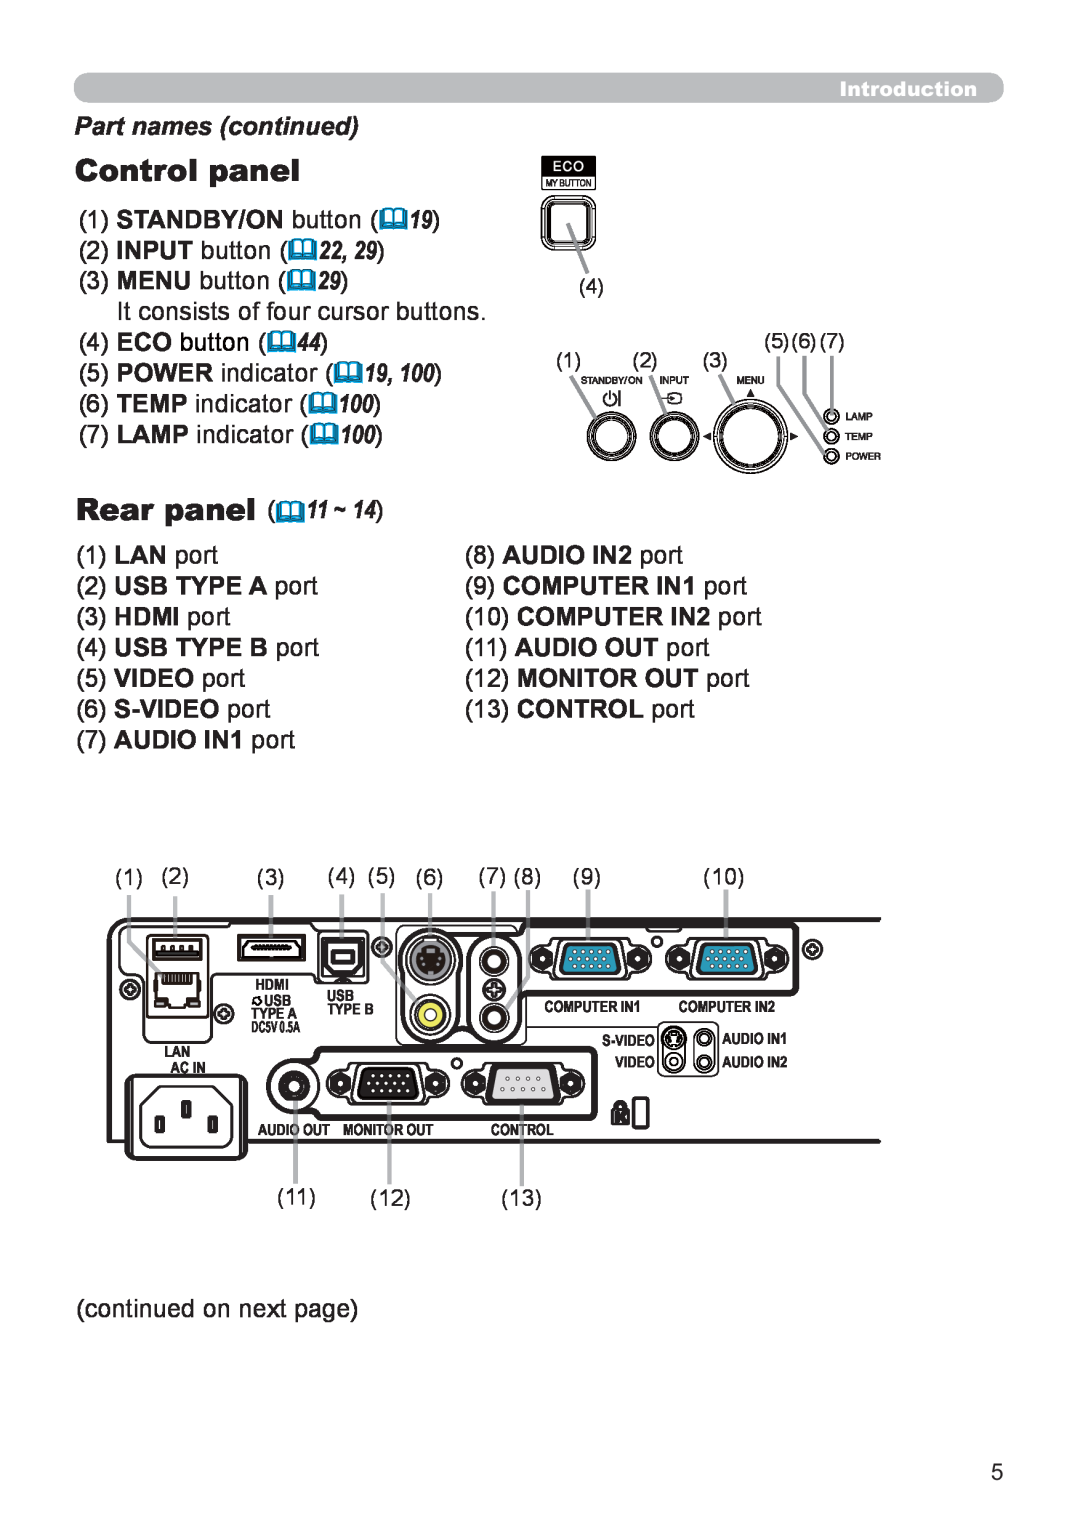 Hitachi CP-X3021WN Part names continued, 1STANDBY/ON button, LAN port, AUDIO IN2 port, USB TYPE A port, COMPUTER IN1 port 